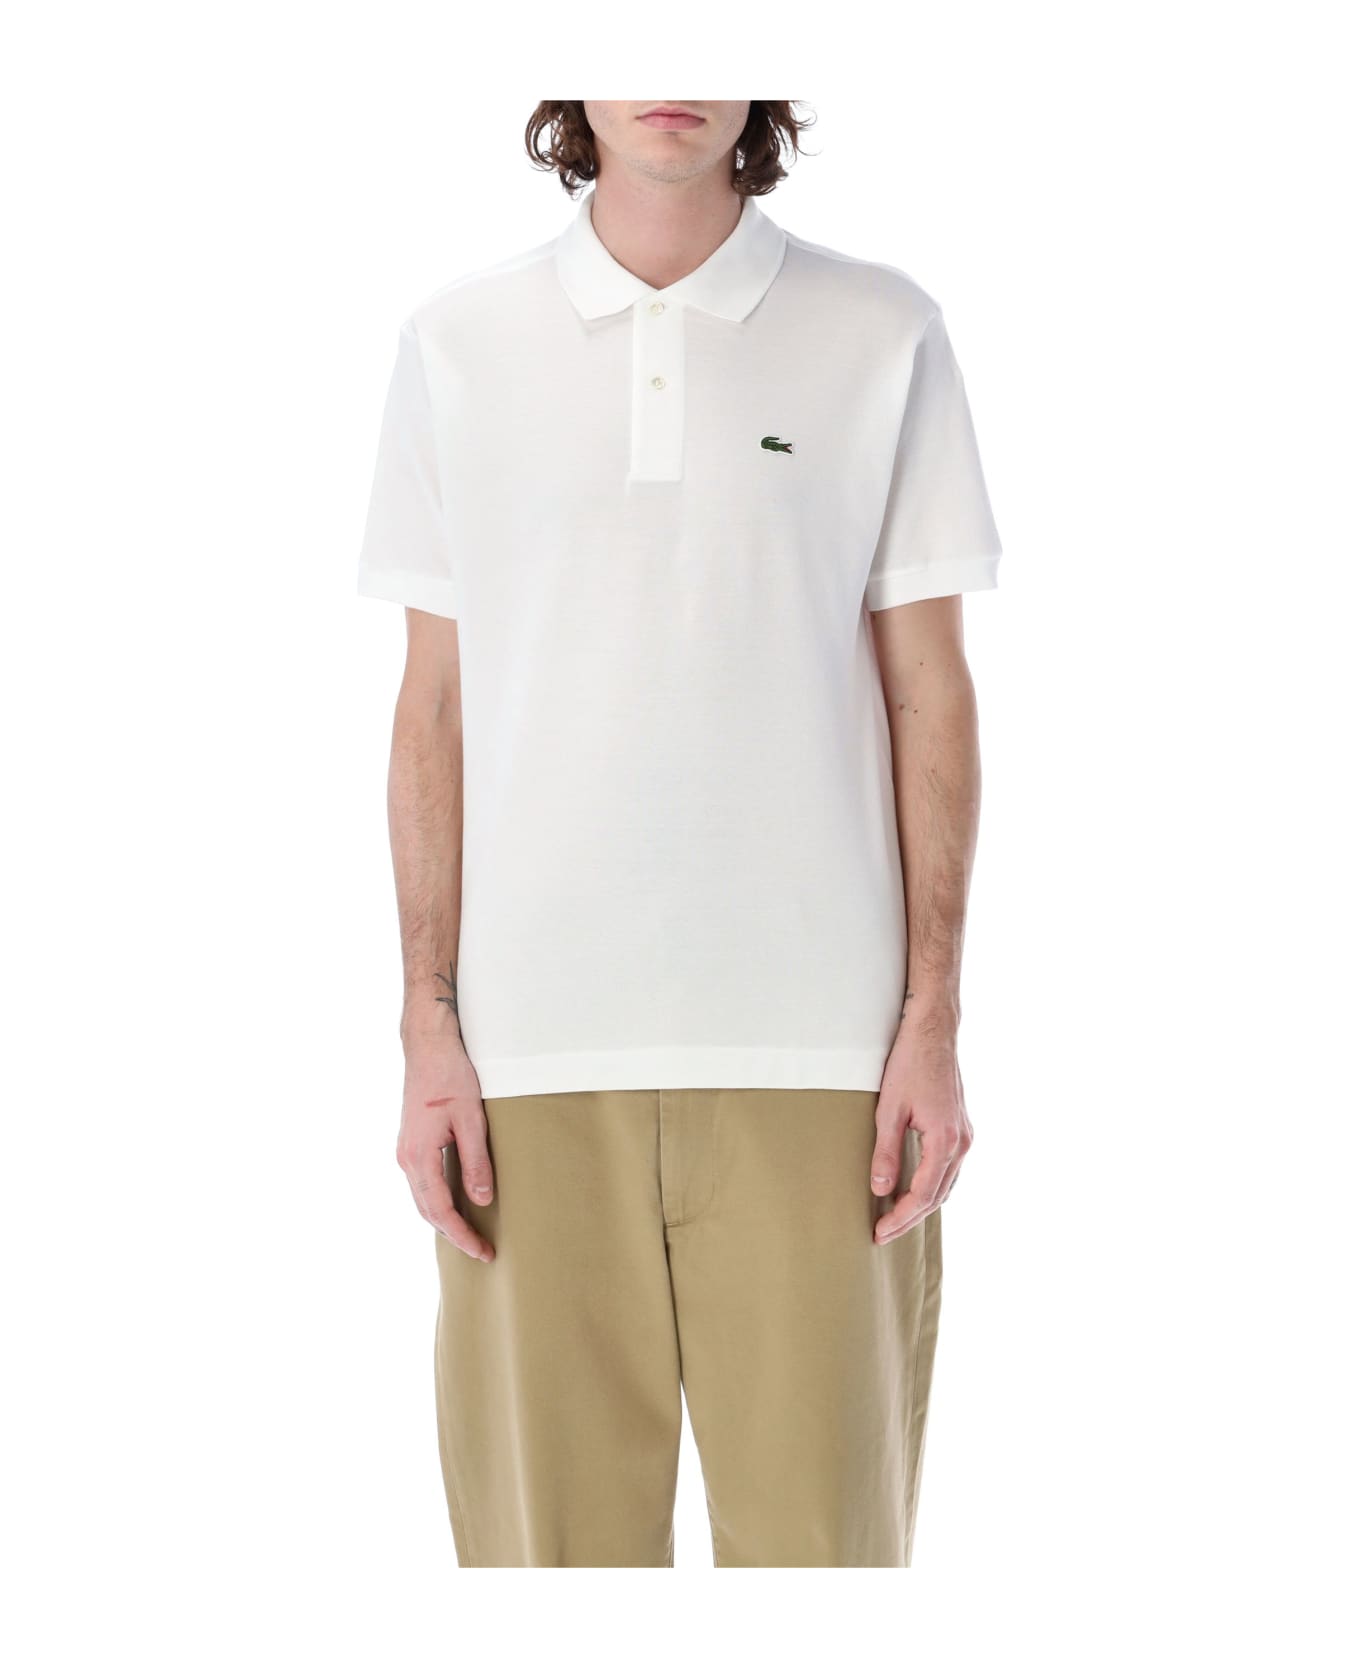 Lacoste Classic Fit Polo Shirt - WHITE ポロシャツ